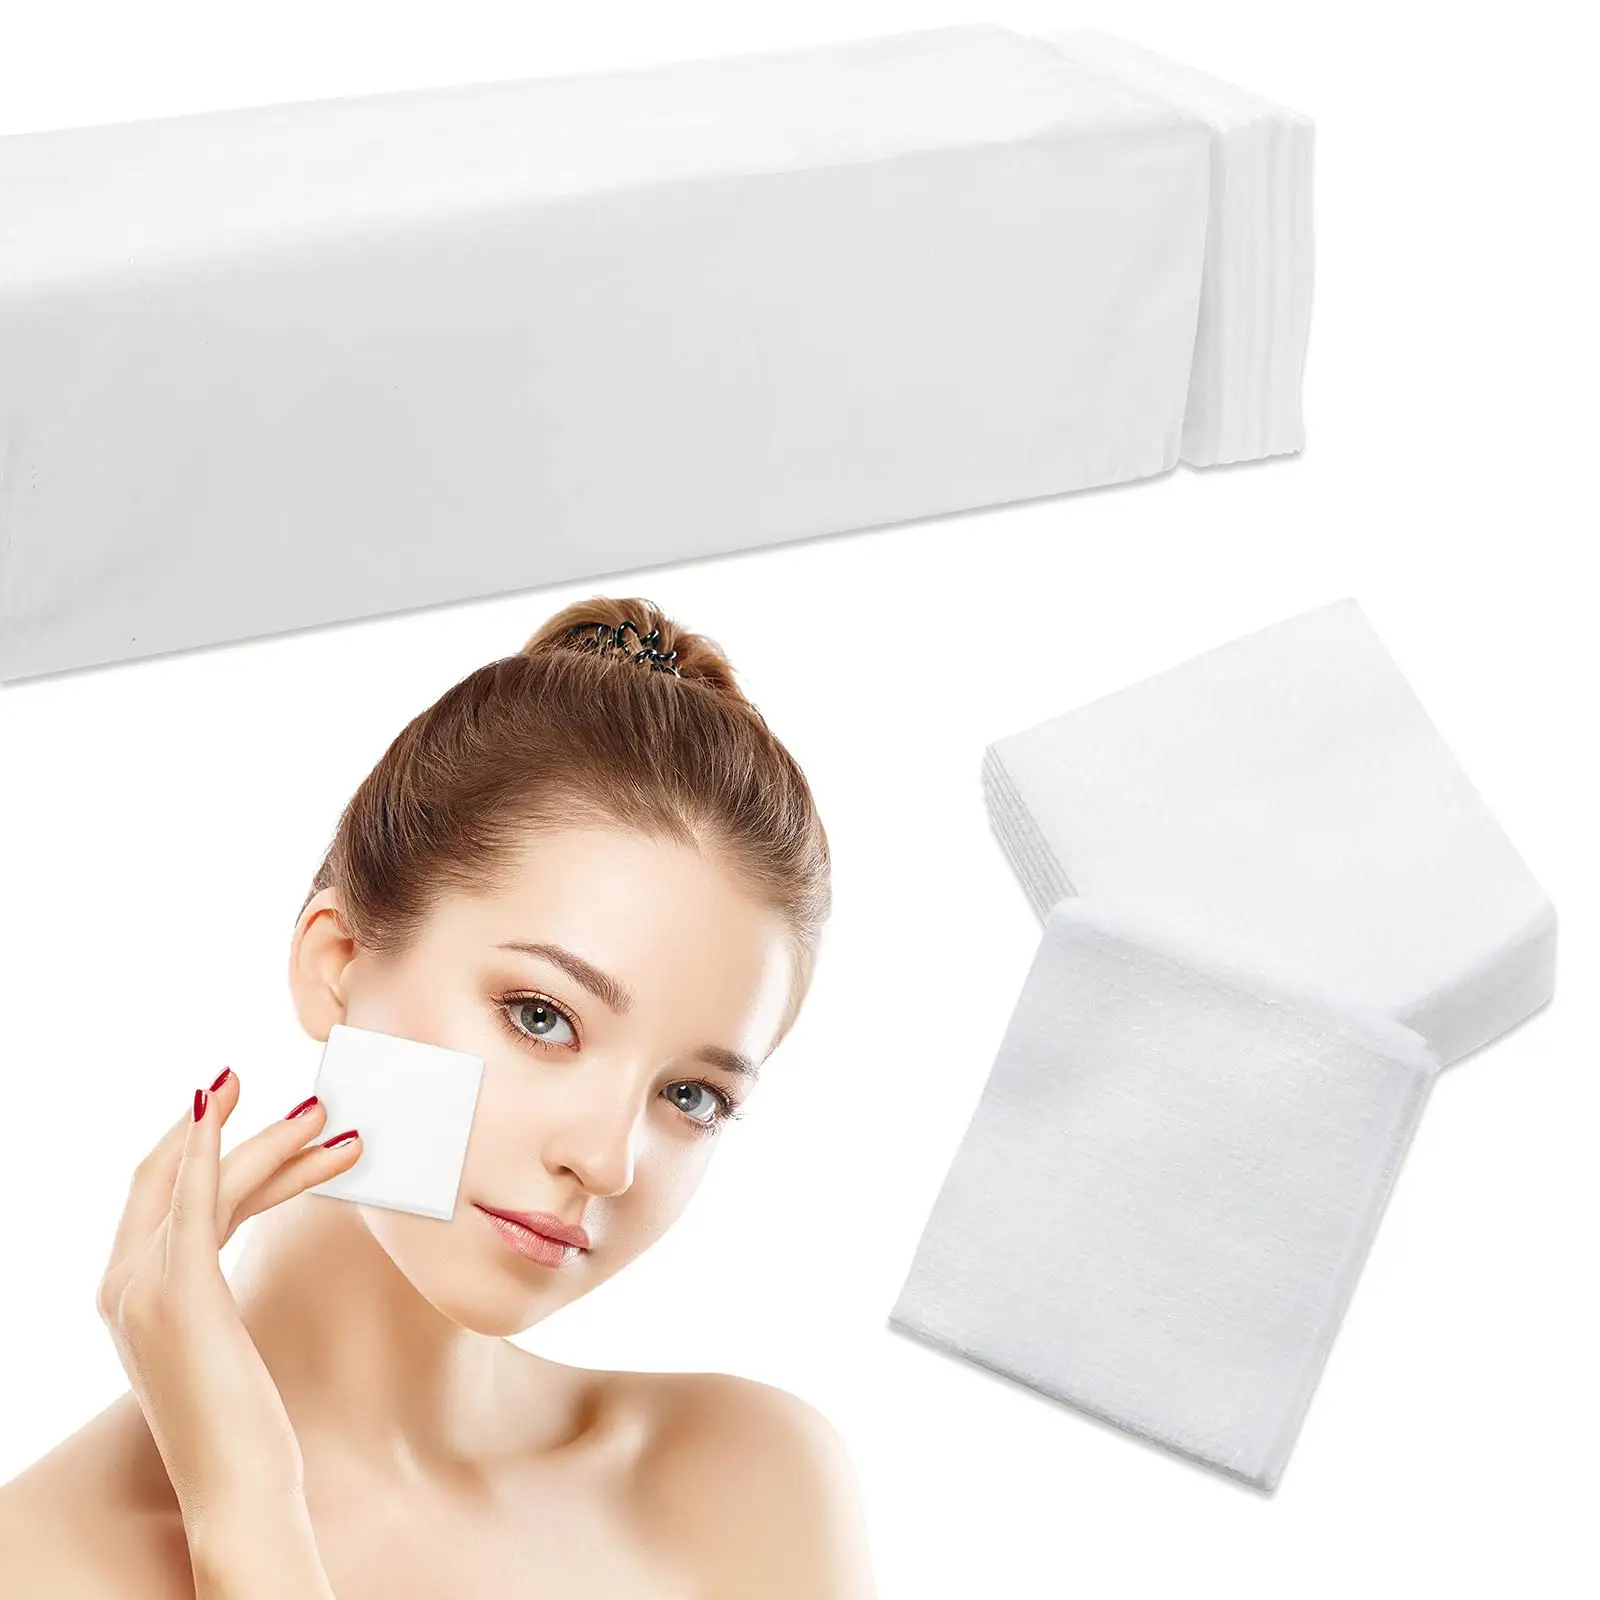 Disposable Esthetic Wipe Non Woven Facial Wipes Squares Aesthetic Spa Petite Silken Wipes for Product Application and Care